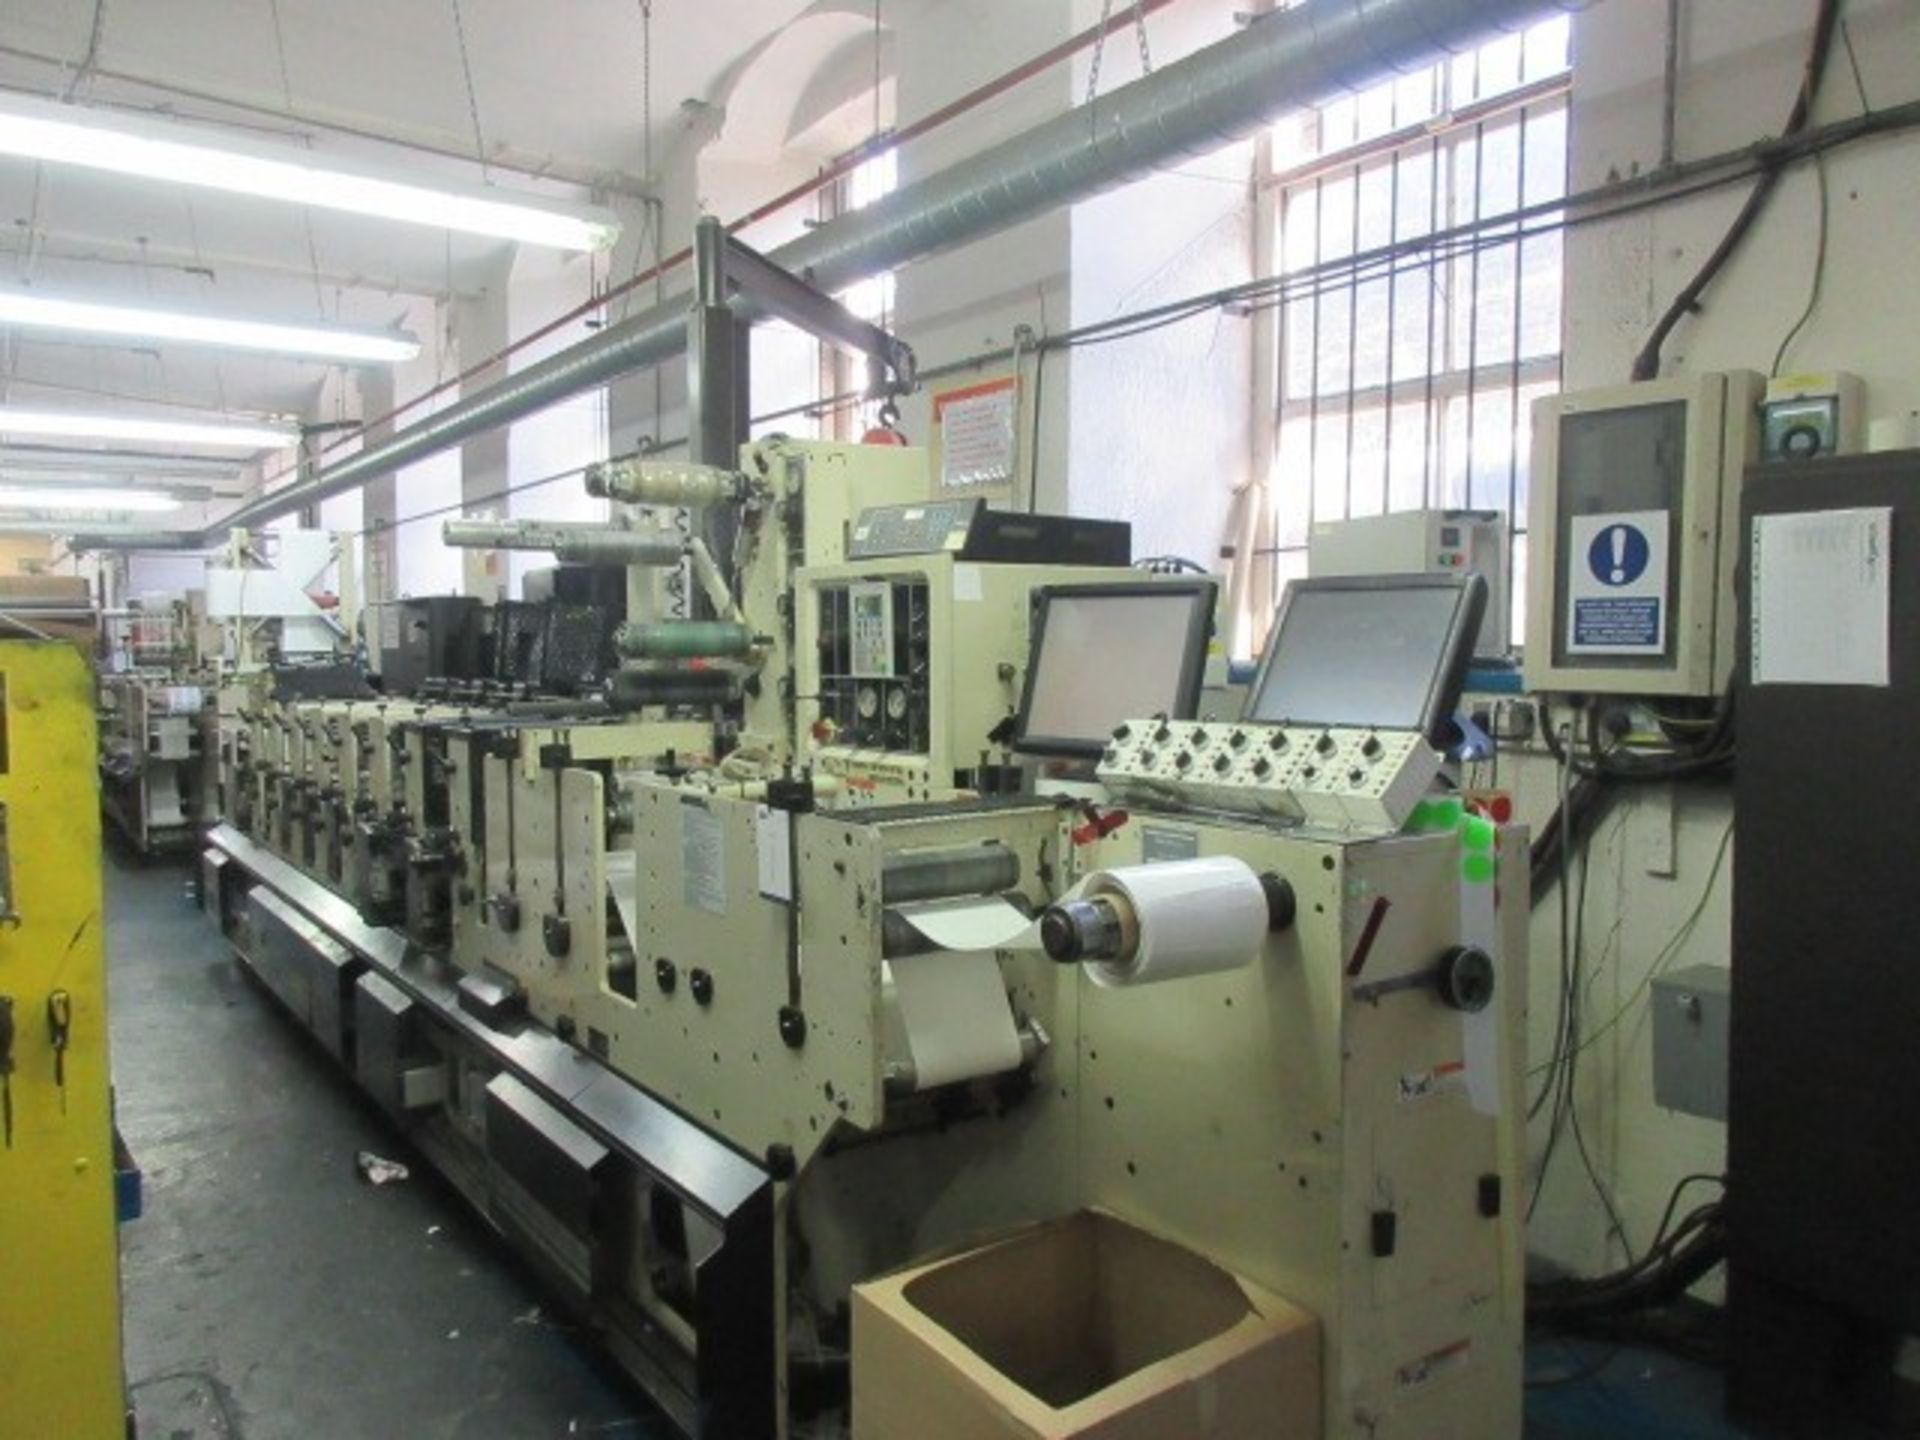 Mark Andy 2200-10F 10” 8 colour flexographic label printing press. Serial no: 1260086 (2002) - Image 4 of 383